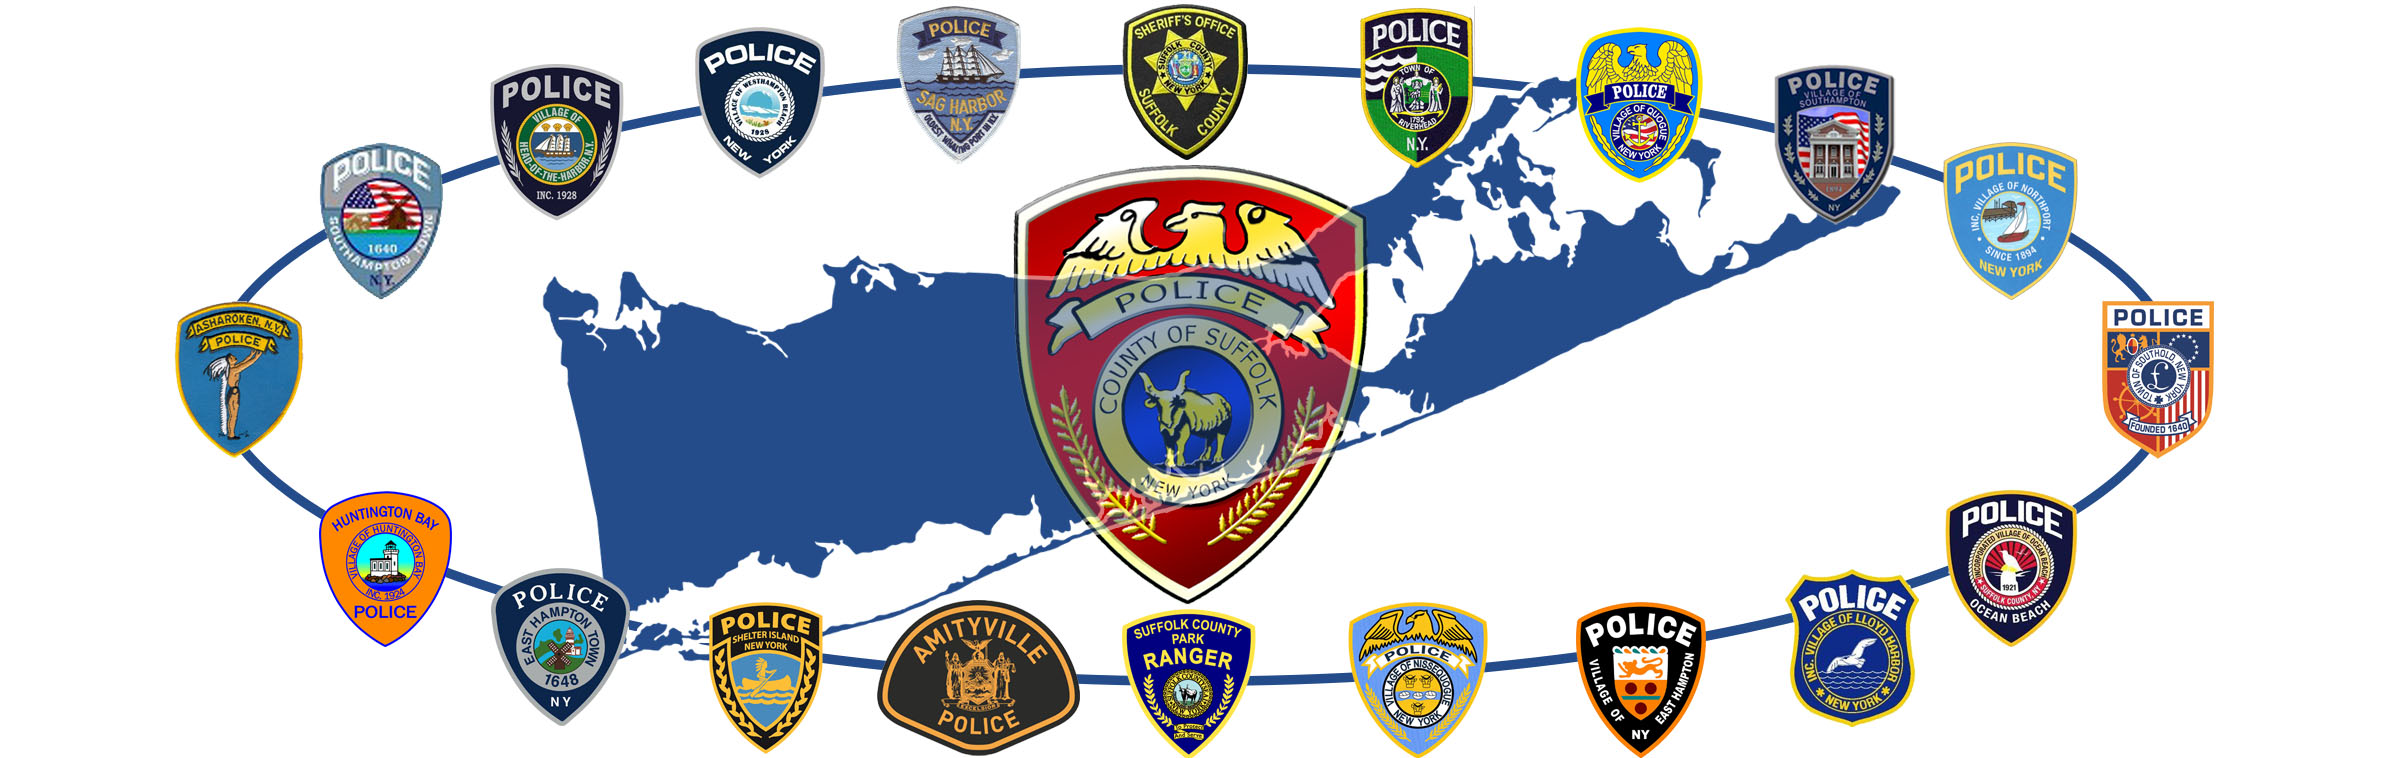 emblems for town and village police forces in Suffolk County